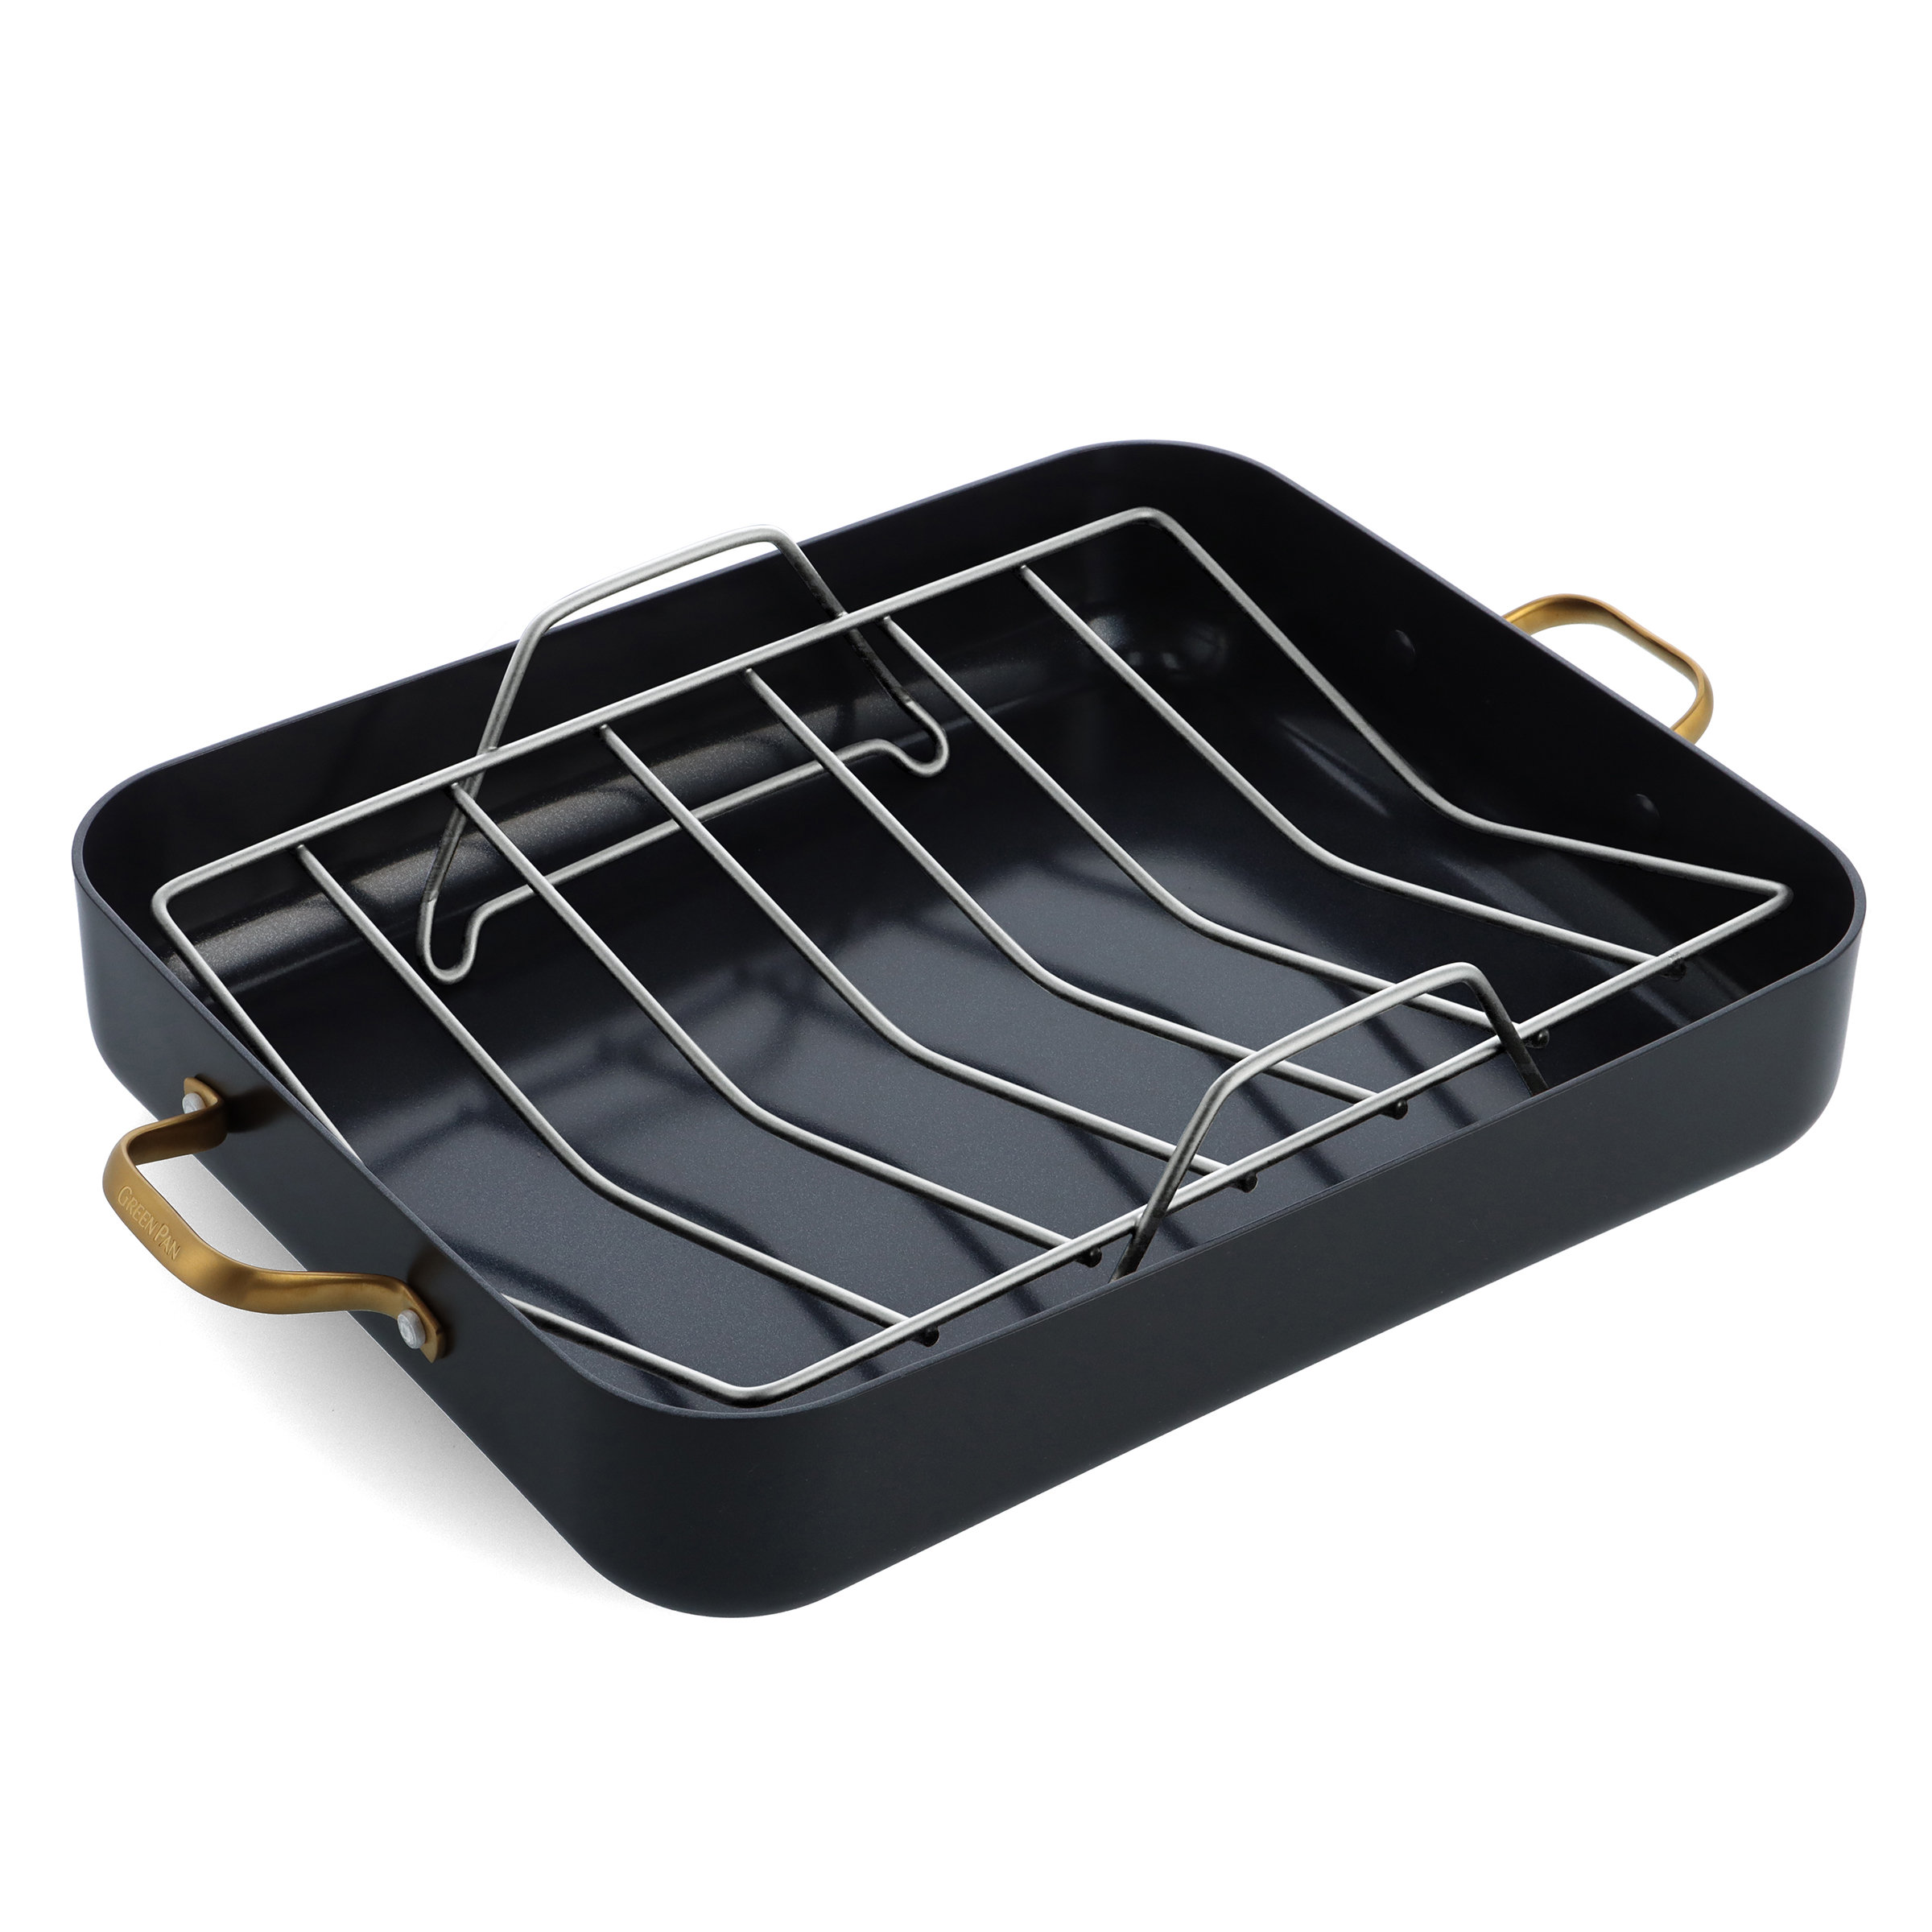 Reserve Ceramic Nonstick 11 Grill Pan with Lid, Black with Gold-Tone